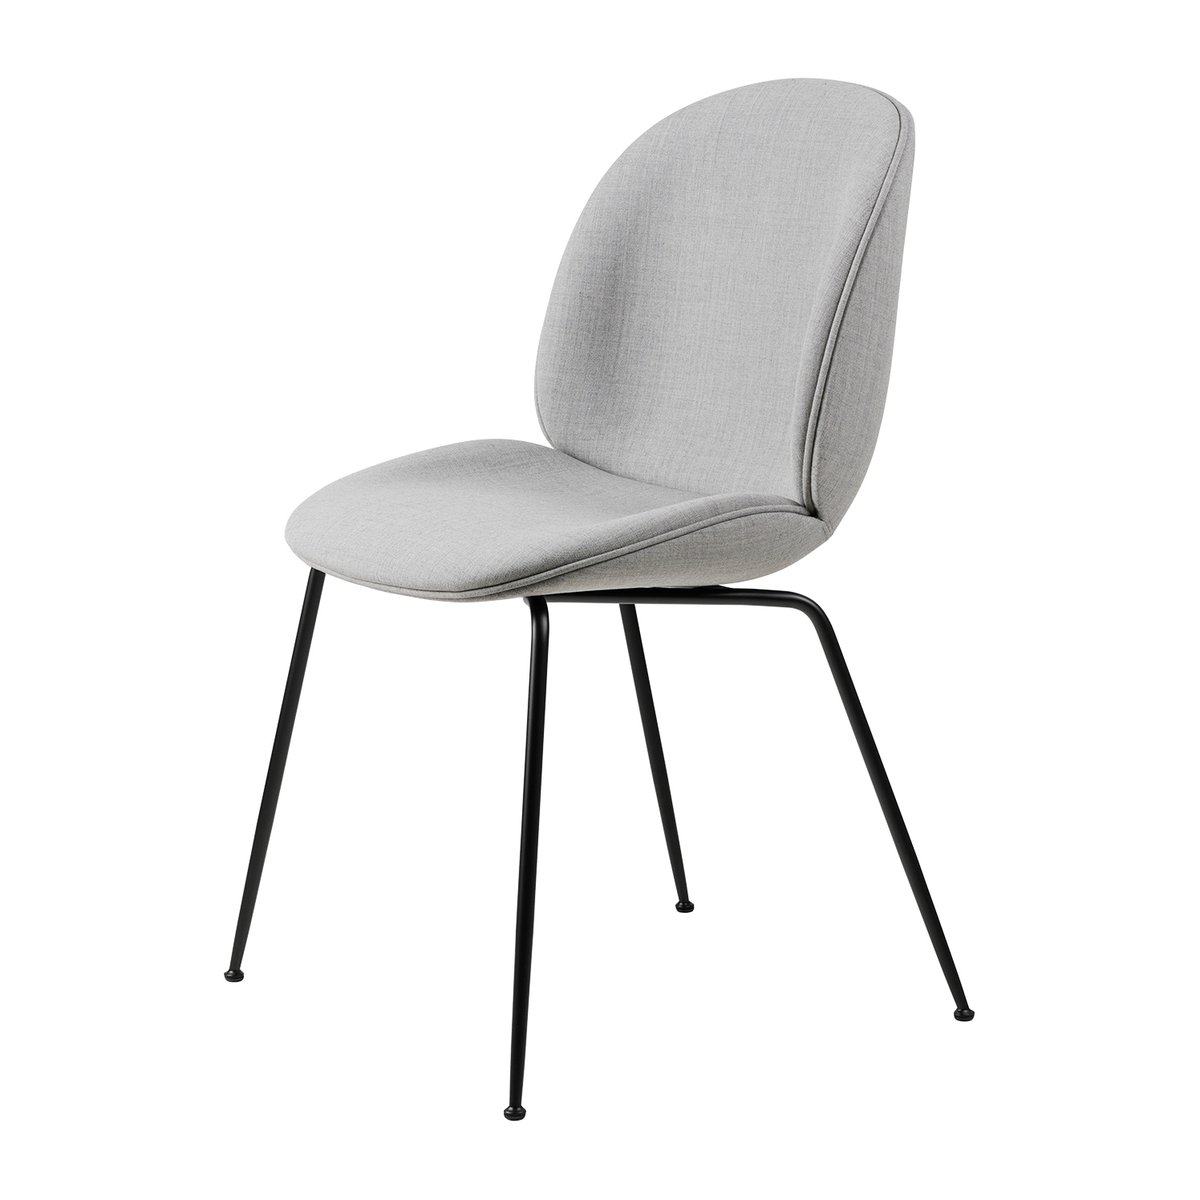 Gubi Beetle dining chair fully upholstered conic base Remix 3 nro 123-black